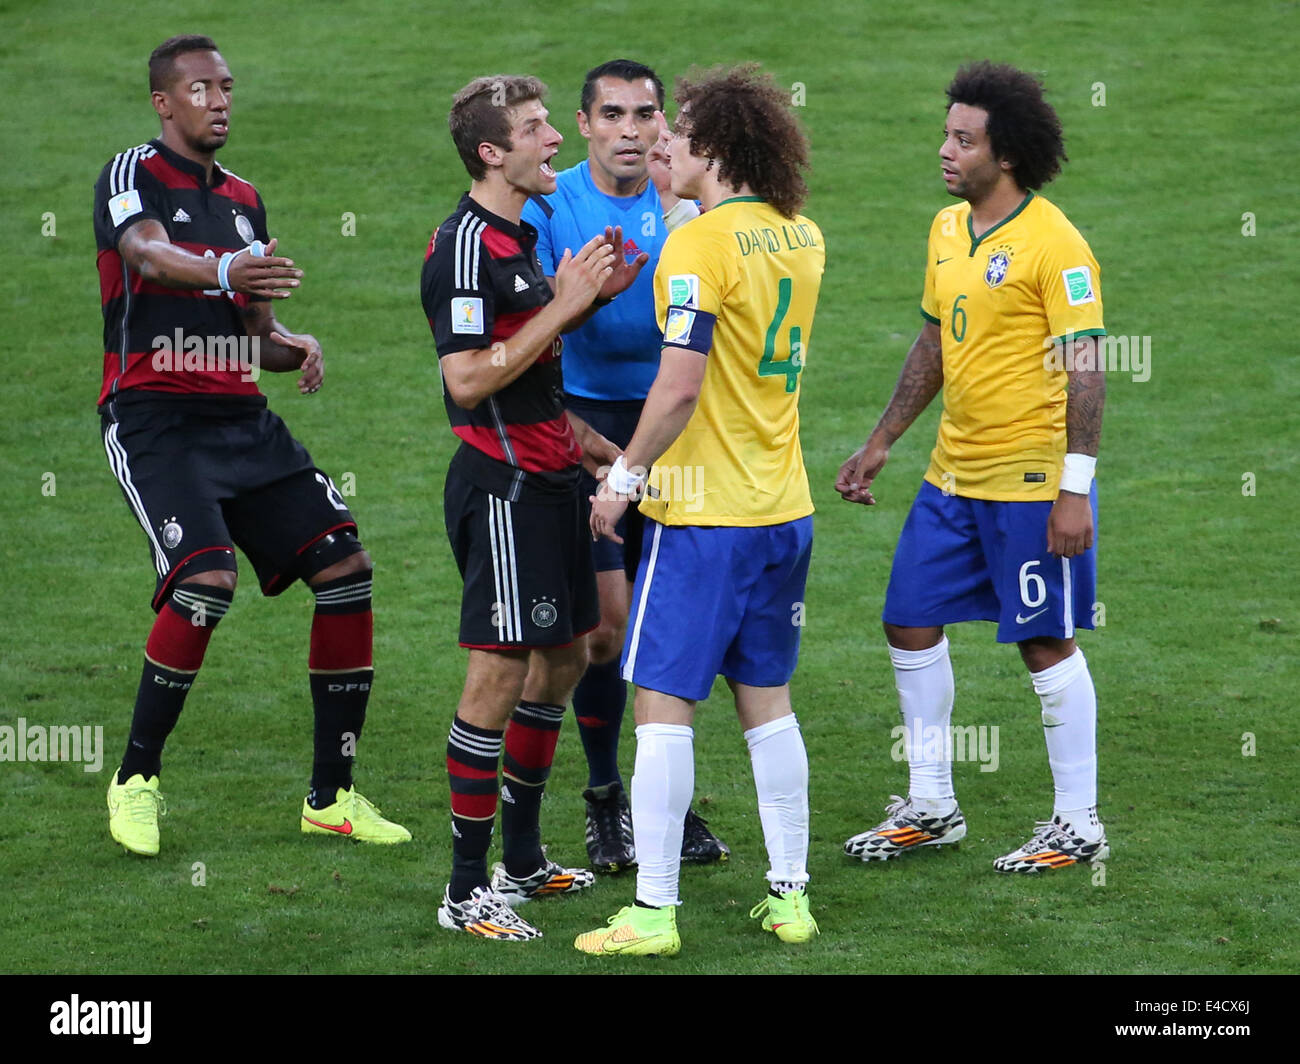 Belo Horizonte, Brazil. 8th July, 2014. Mexico's referee Marco Rodriguez (C) interrupts an arguement between Brazil's David Luiz (2nd R) and Germany's Thomas Muller (2nd L) during a semifinal match between Brazil and Germany of 2014 FIFA World Cup at the Estadio Mineirao Stadium in Belo Horizonte, Brazil, on July 8, 2014. Germany won 7-1 over Brazil and qualified for the final on Tuesday. Credit:  Li Ming/Xinhua/Alamy Live News Stock Photo